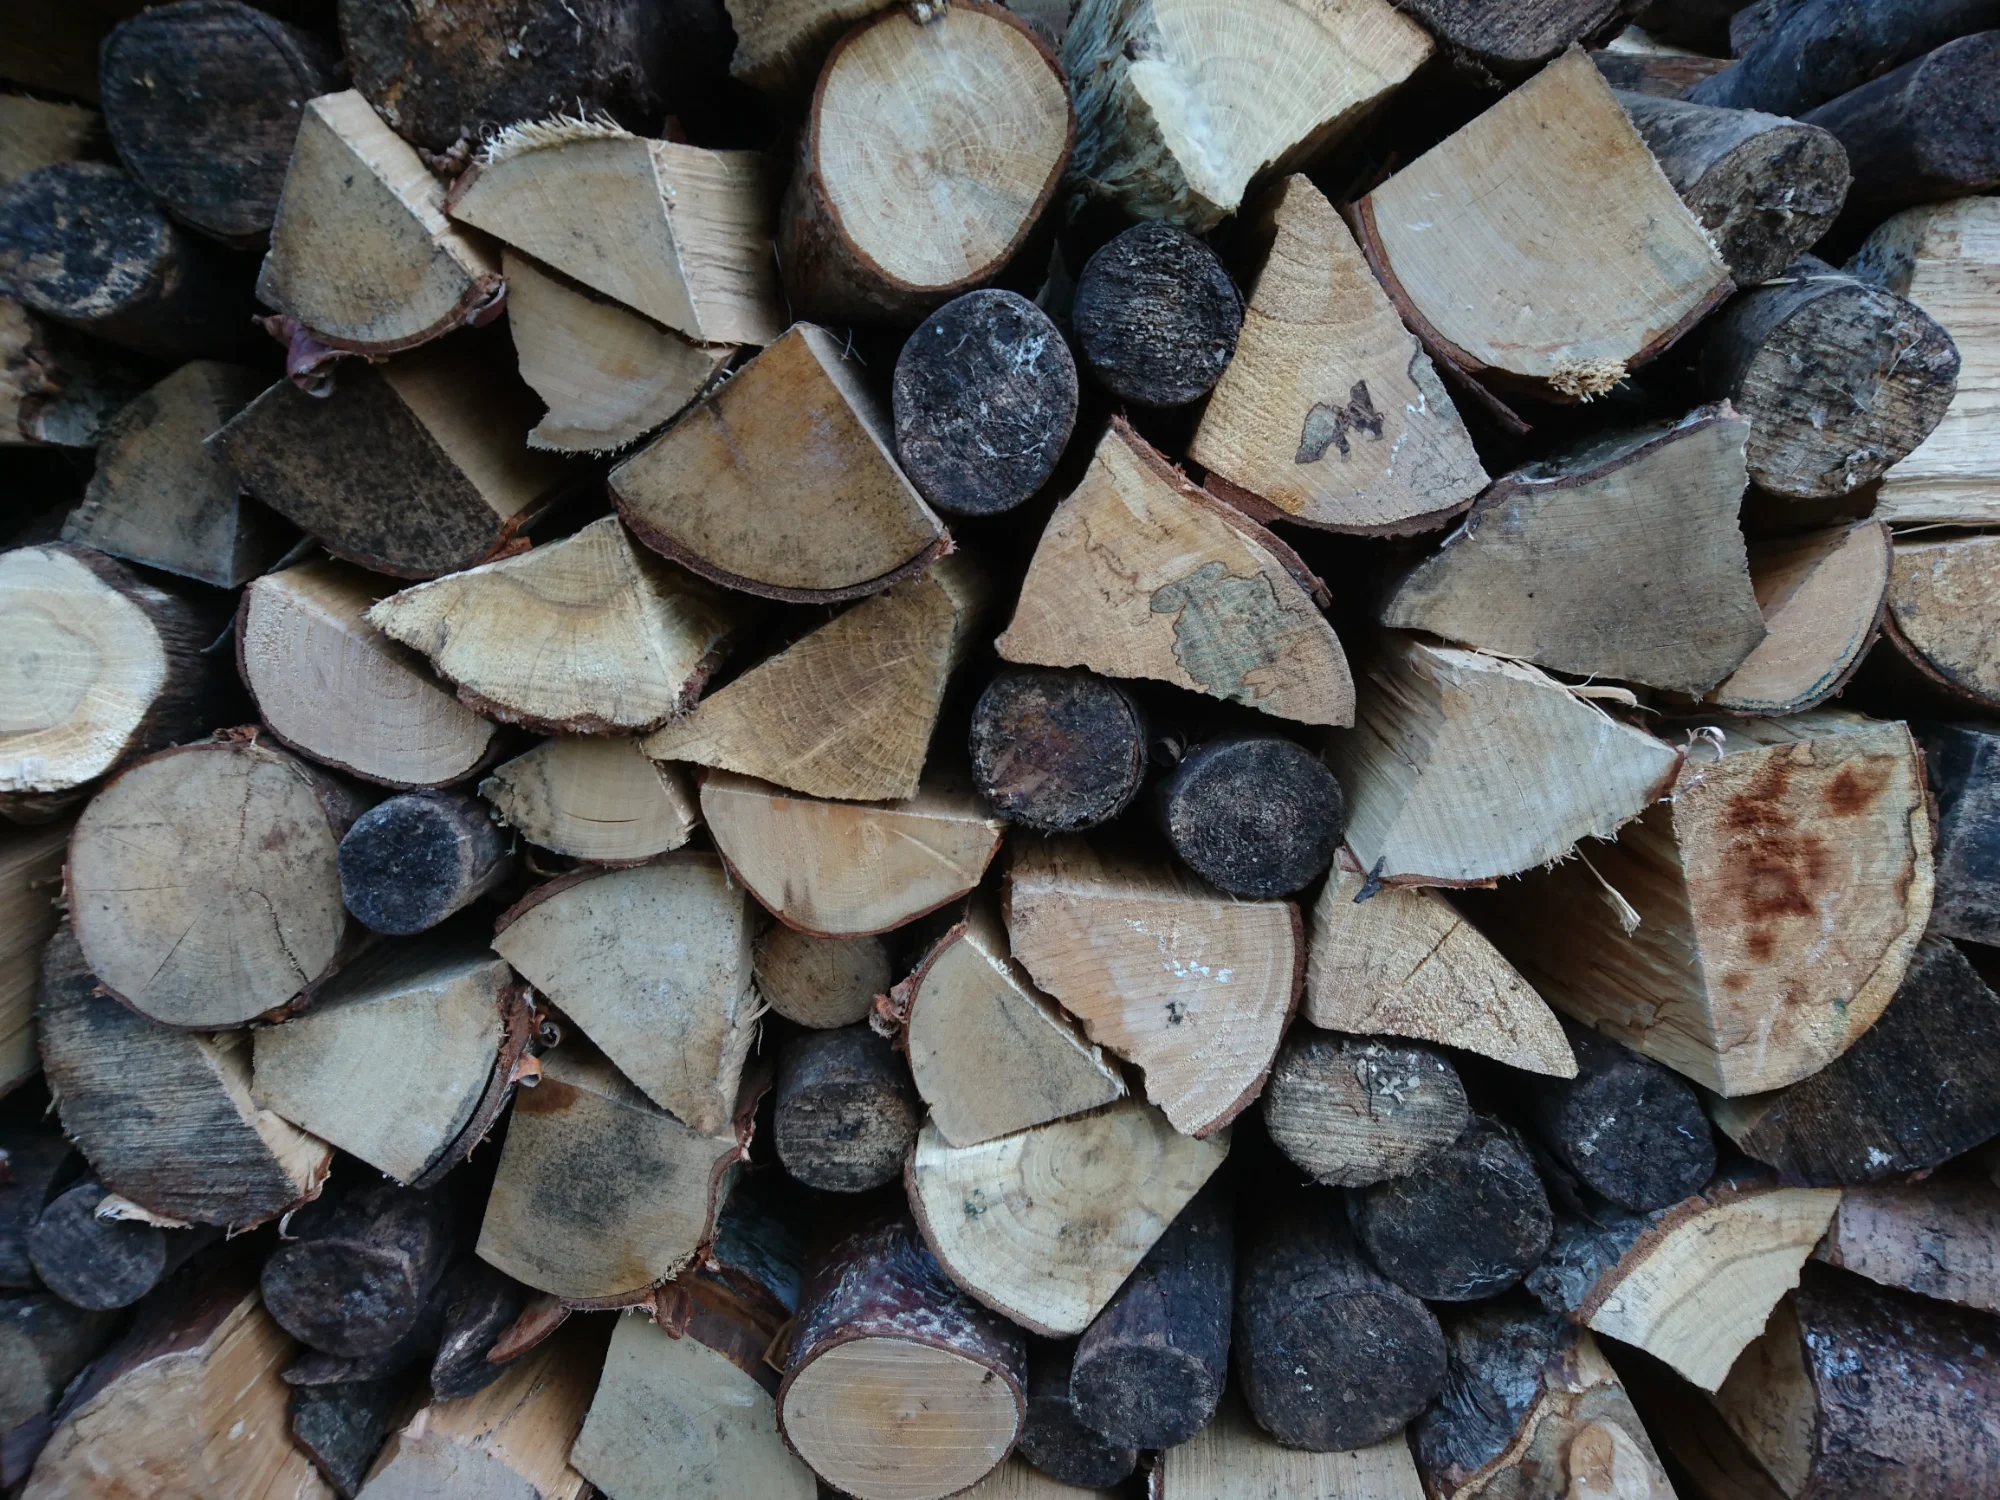 Re-connecting with our woodpiles